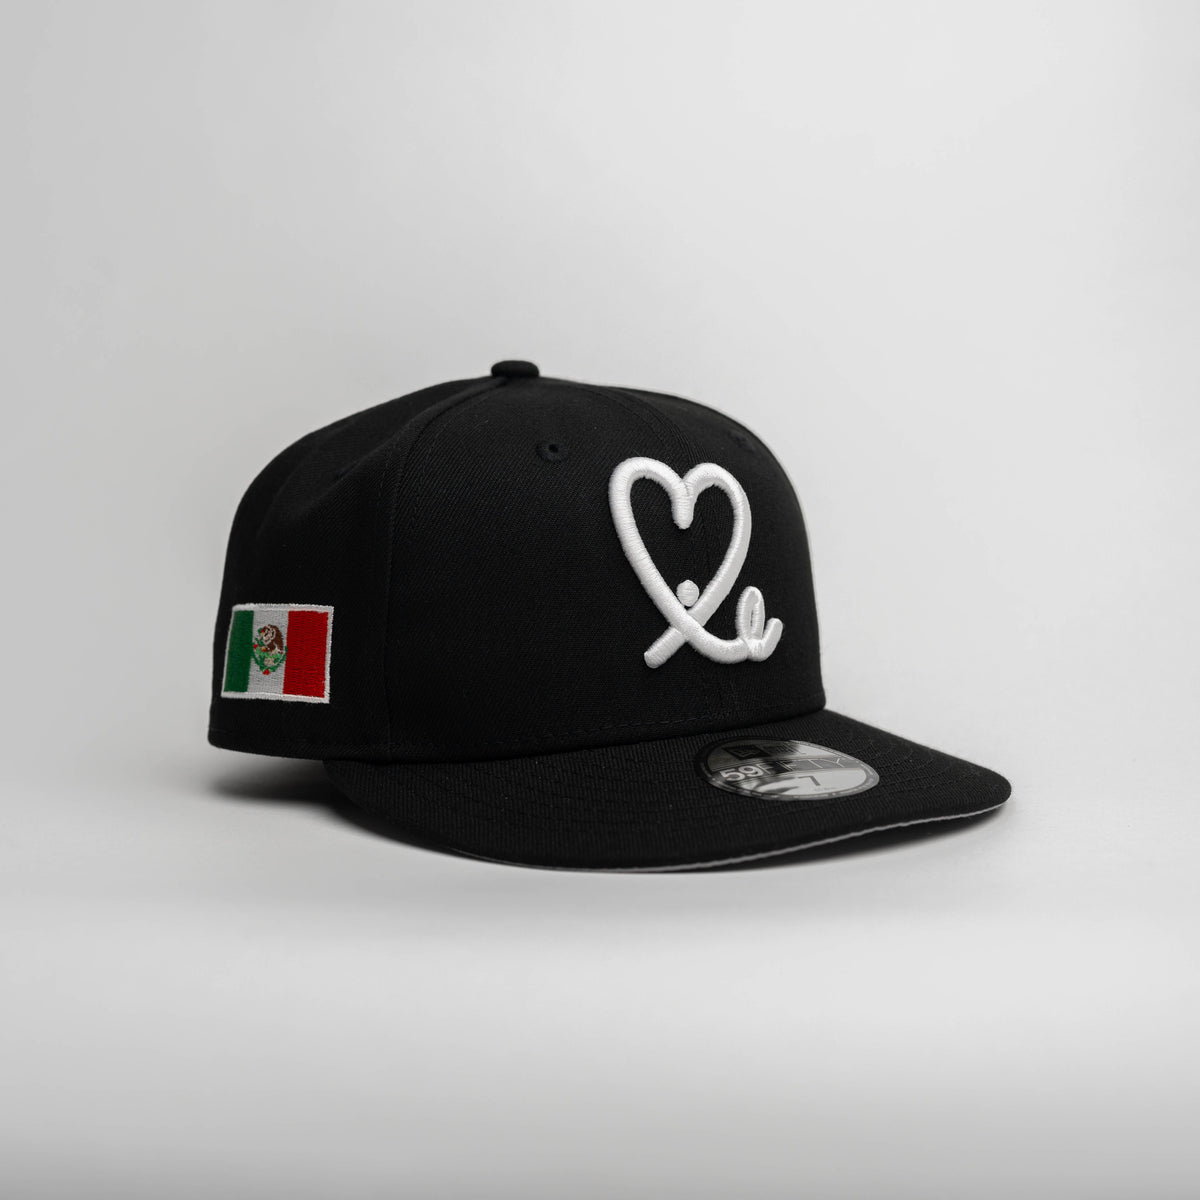 Limited Black / White Puerto Rico Flag 1LoveIE New Era 59FIFTY Fitted